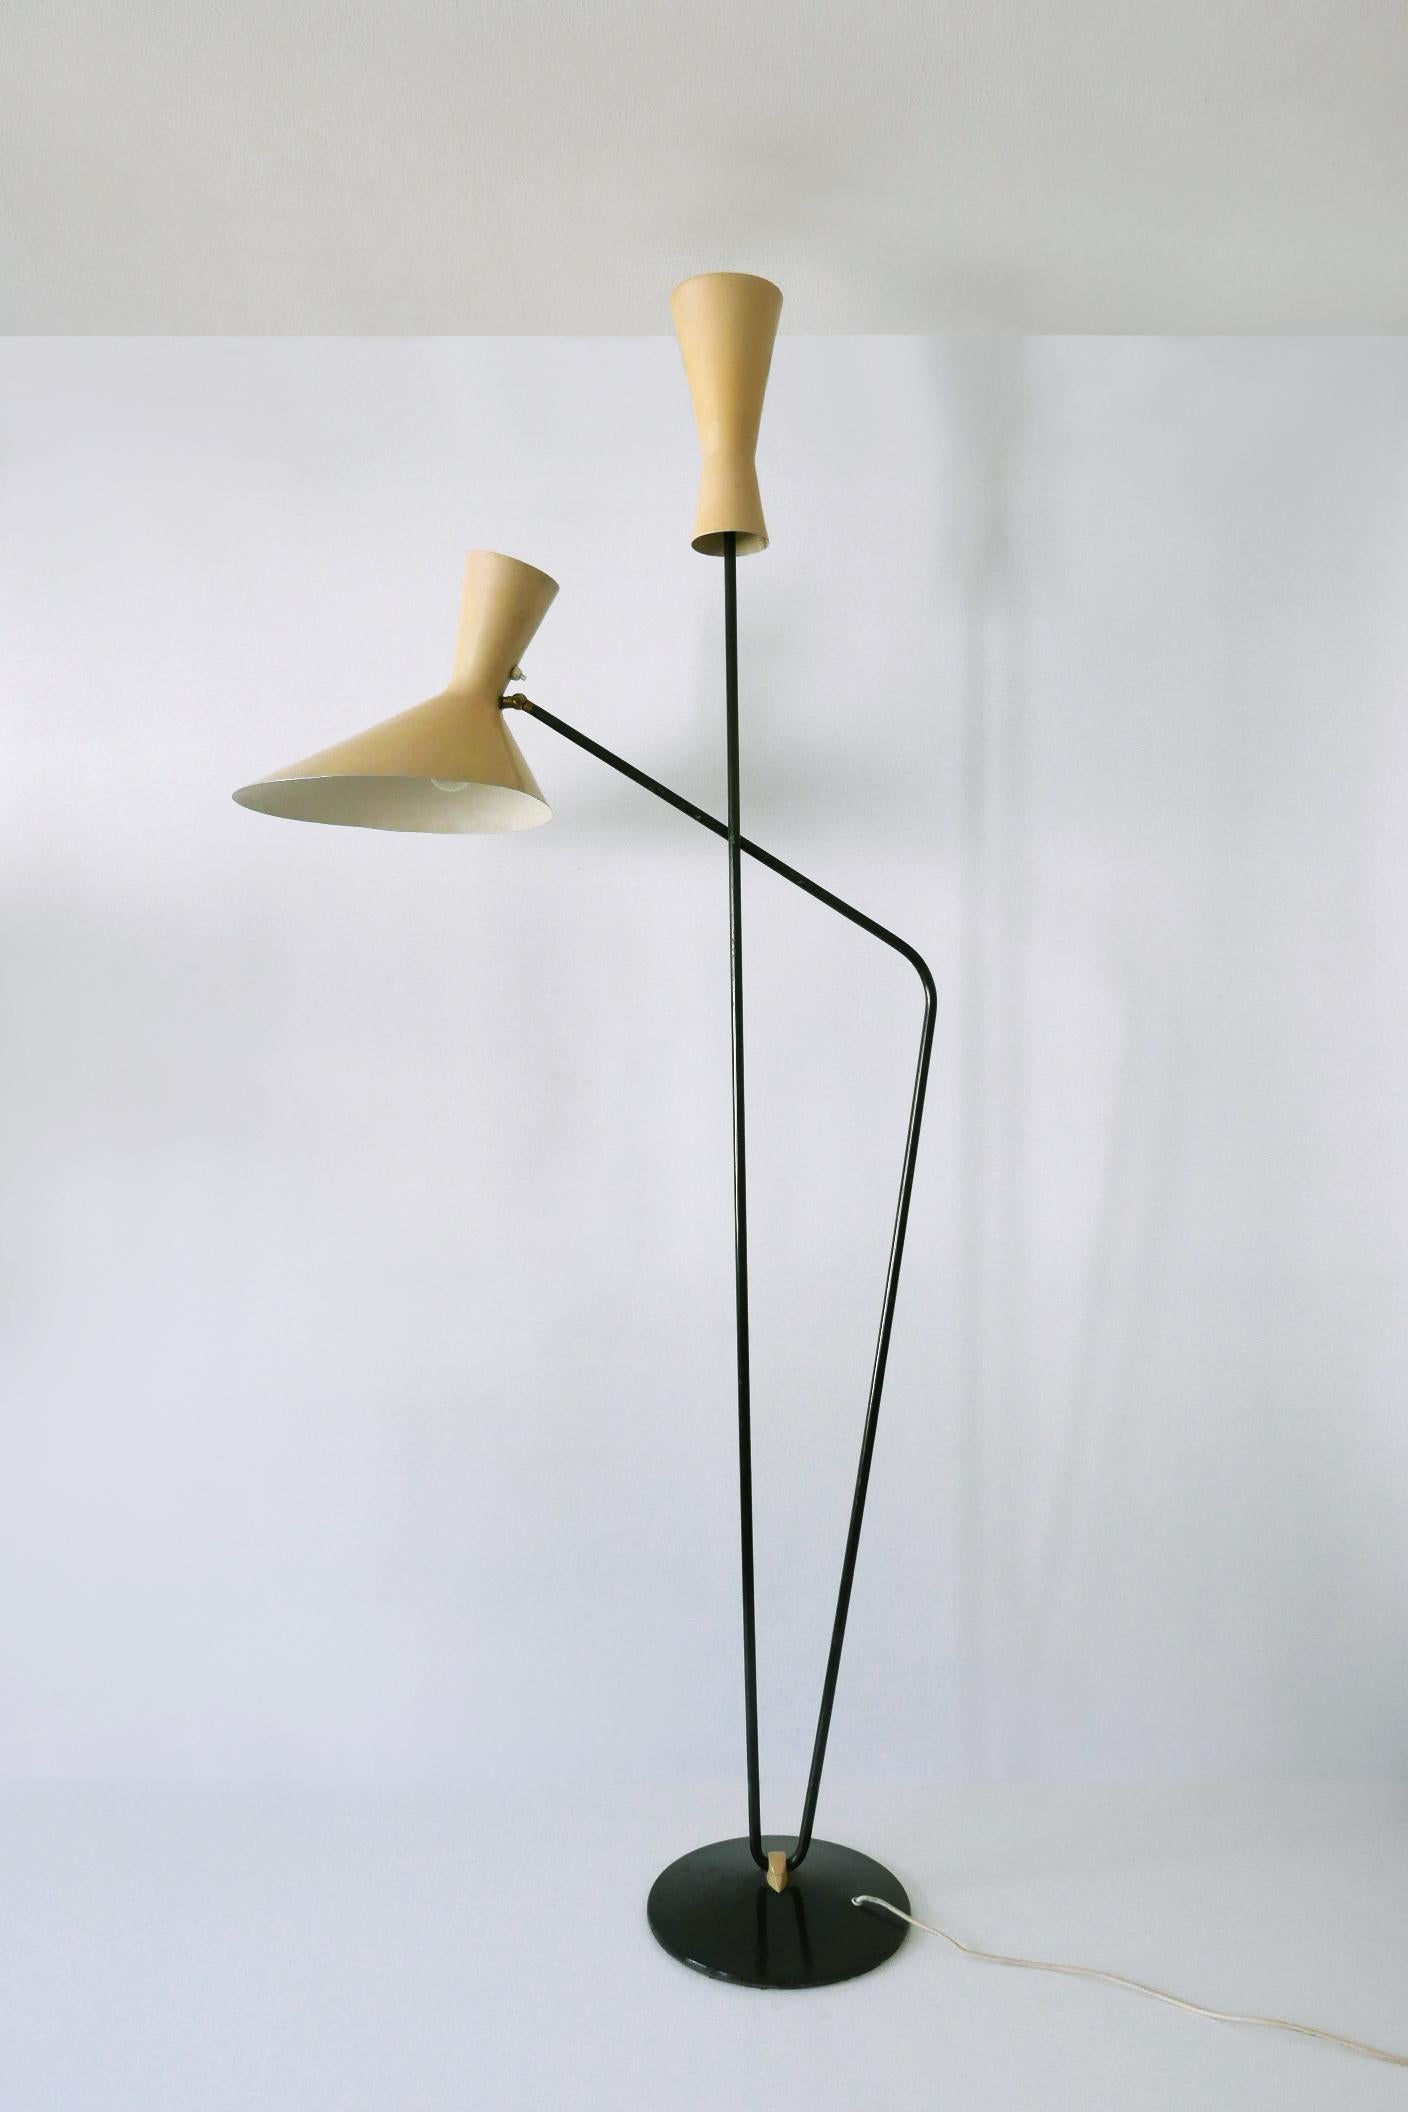 Aluminum Rare Iconic Mid-Century Modern Floor Lamp by Prof. Carl Moor for BAG Turgi 1950s For Sale